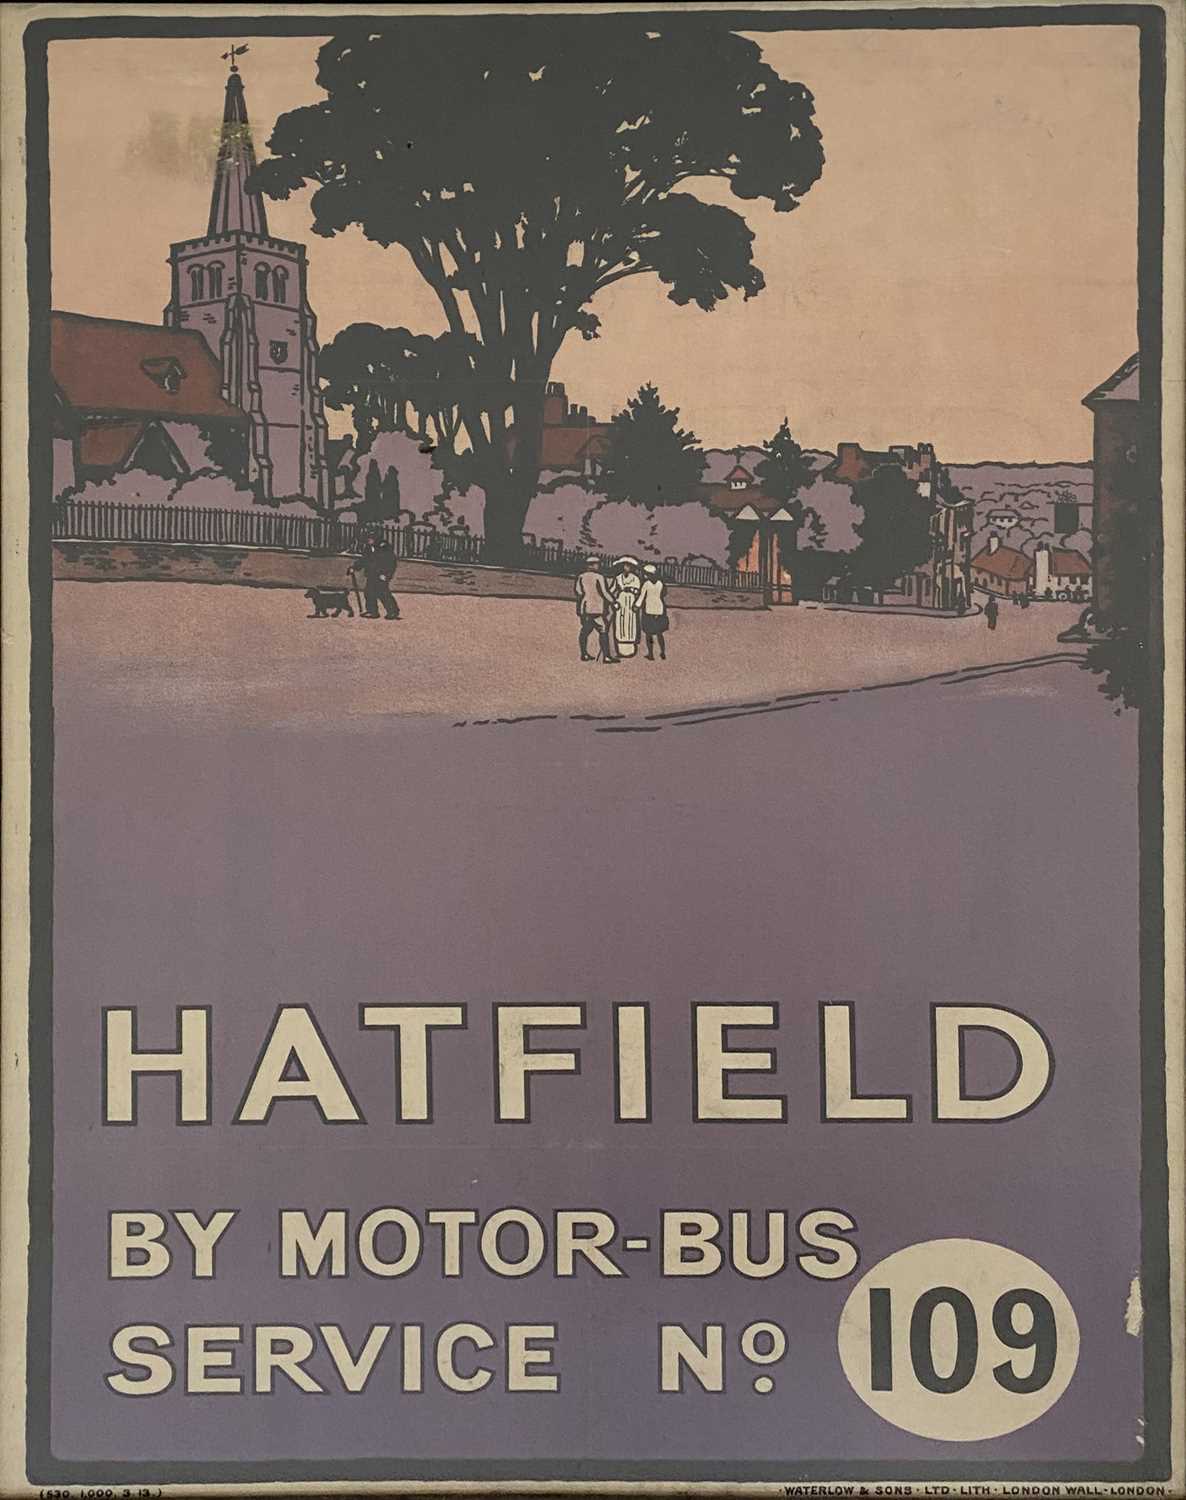 Lot 523 - 'Hatfield by Motor-bus Service no. 109', a lithographic travel poster